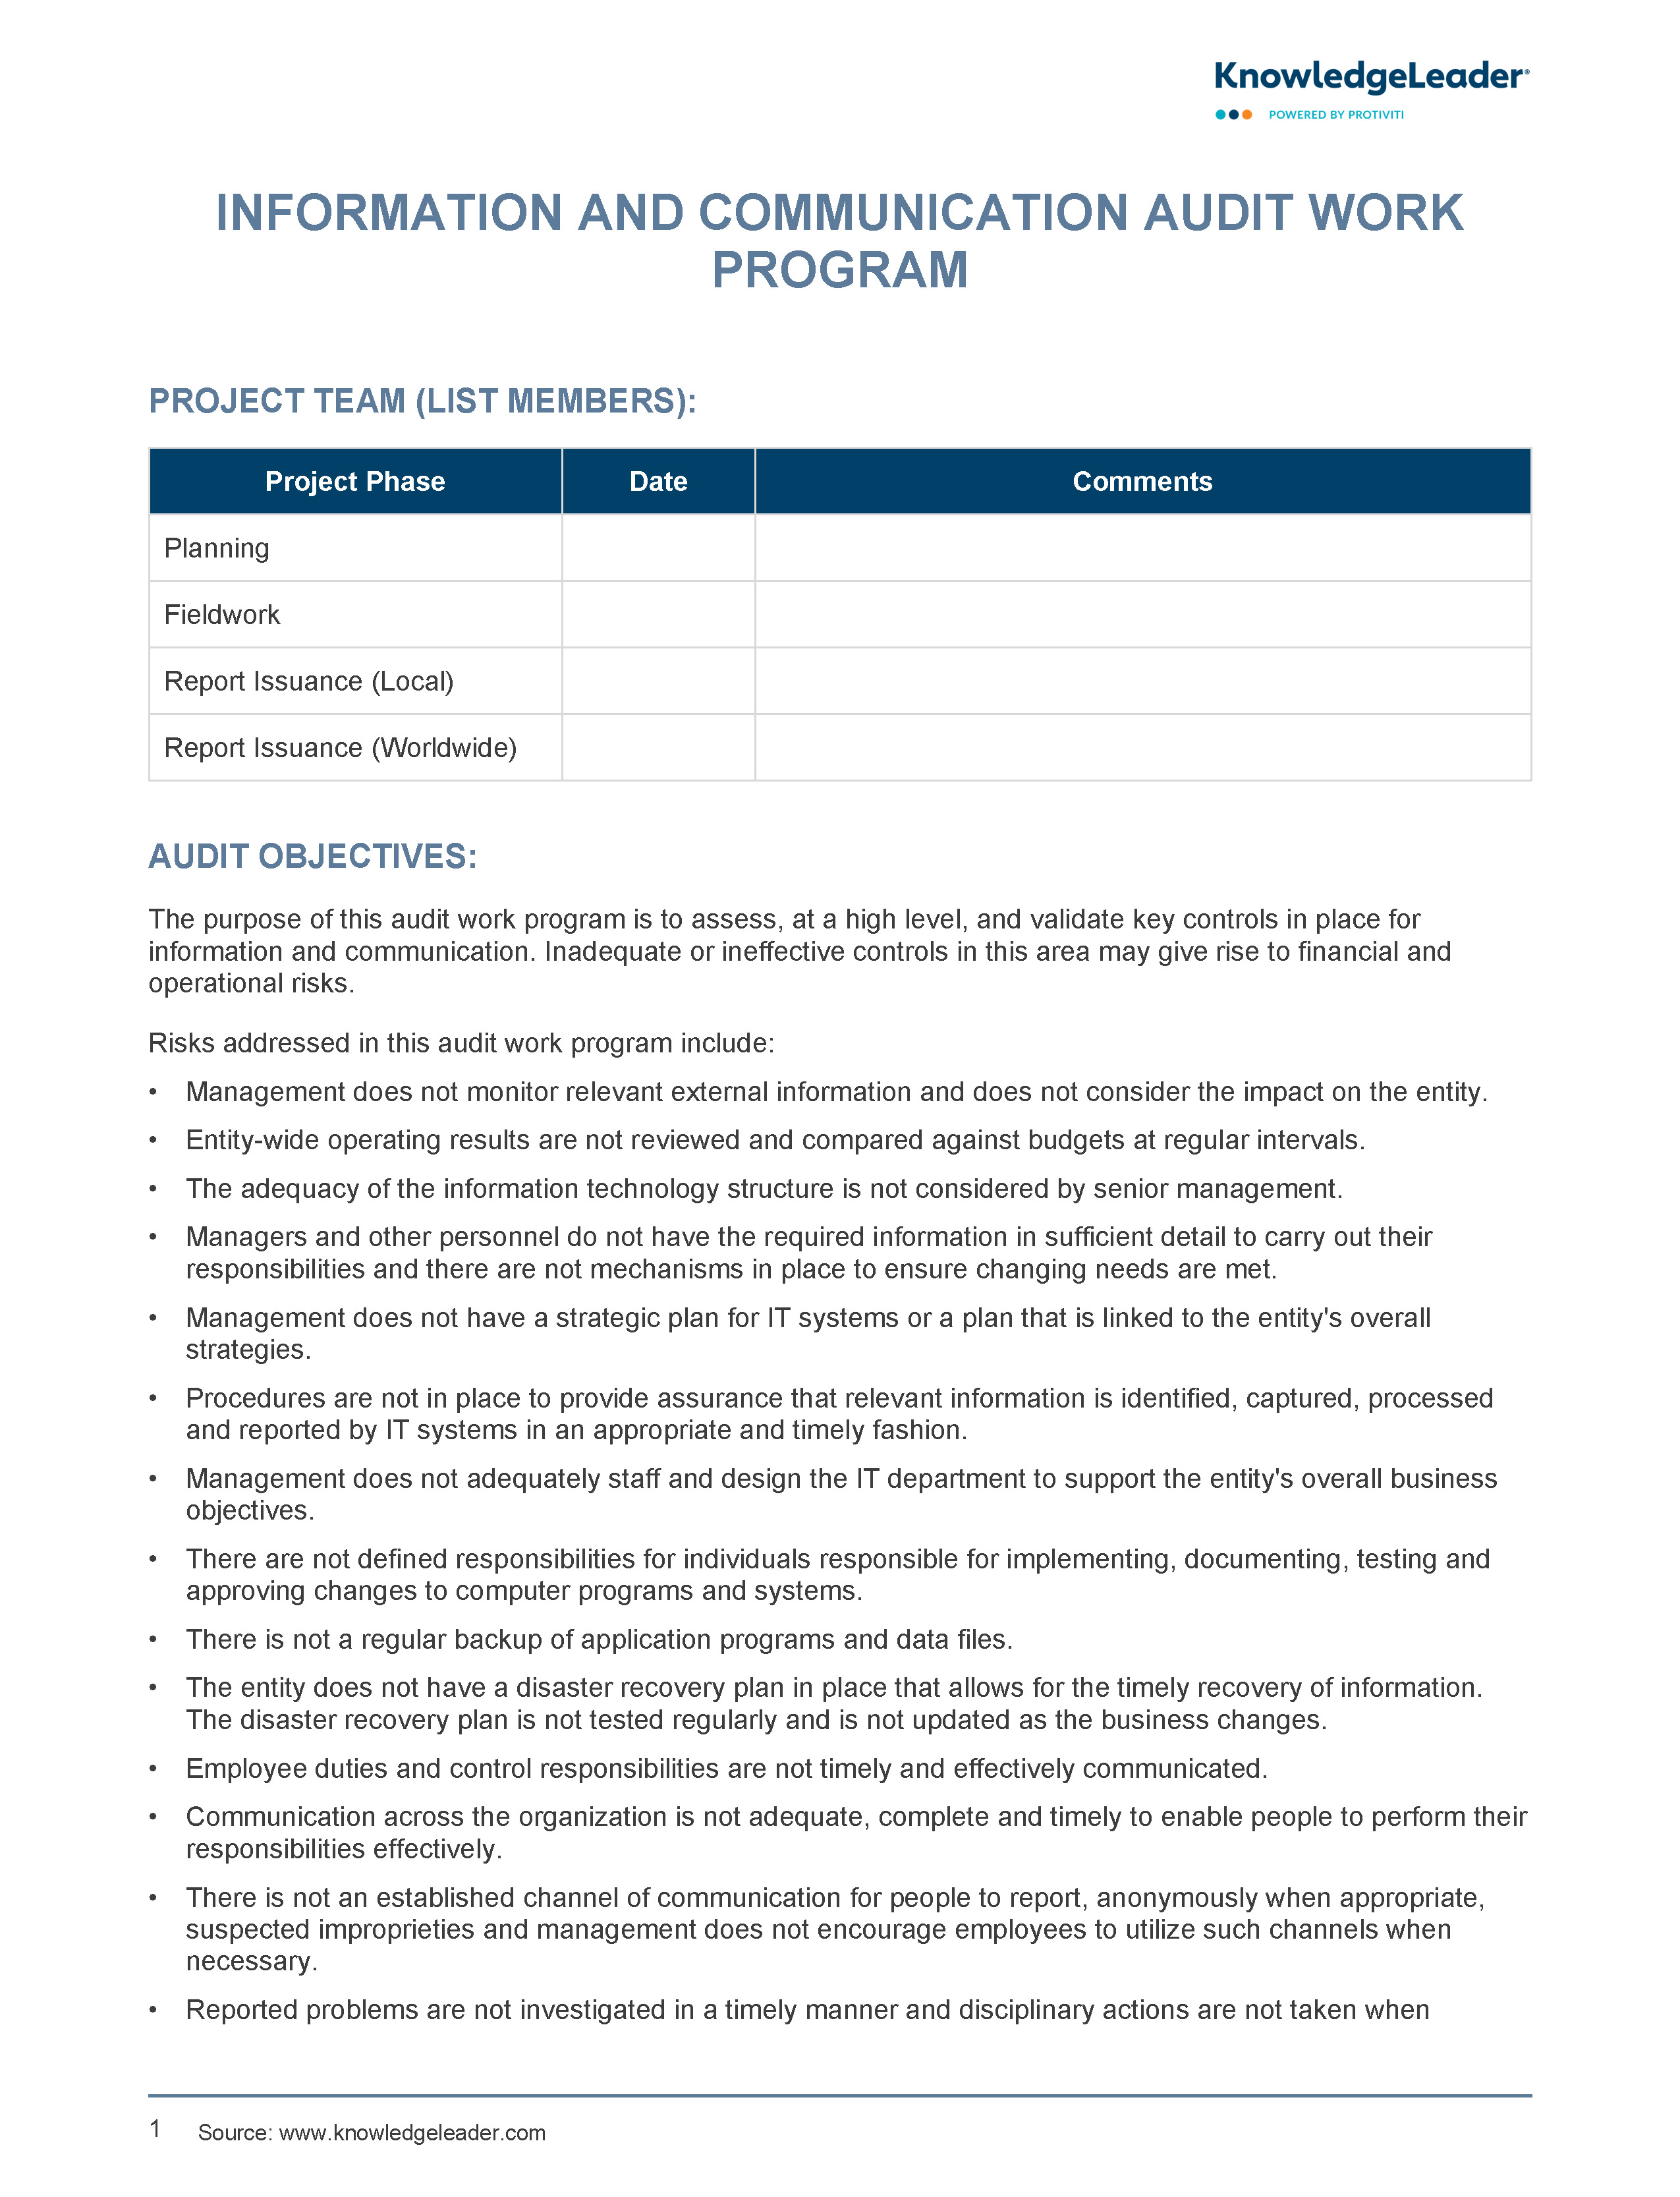 Screenshot of the first page of Information and Communication Audit Work Program